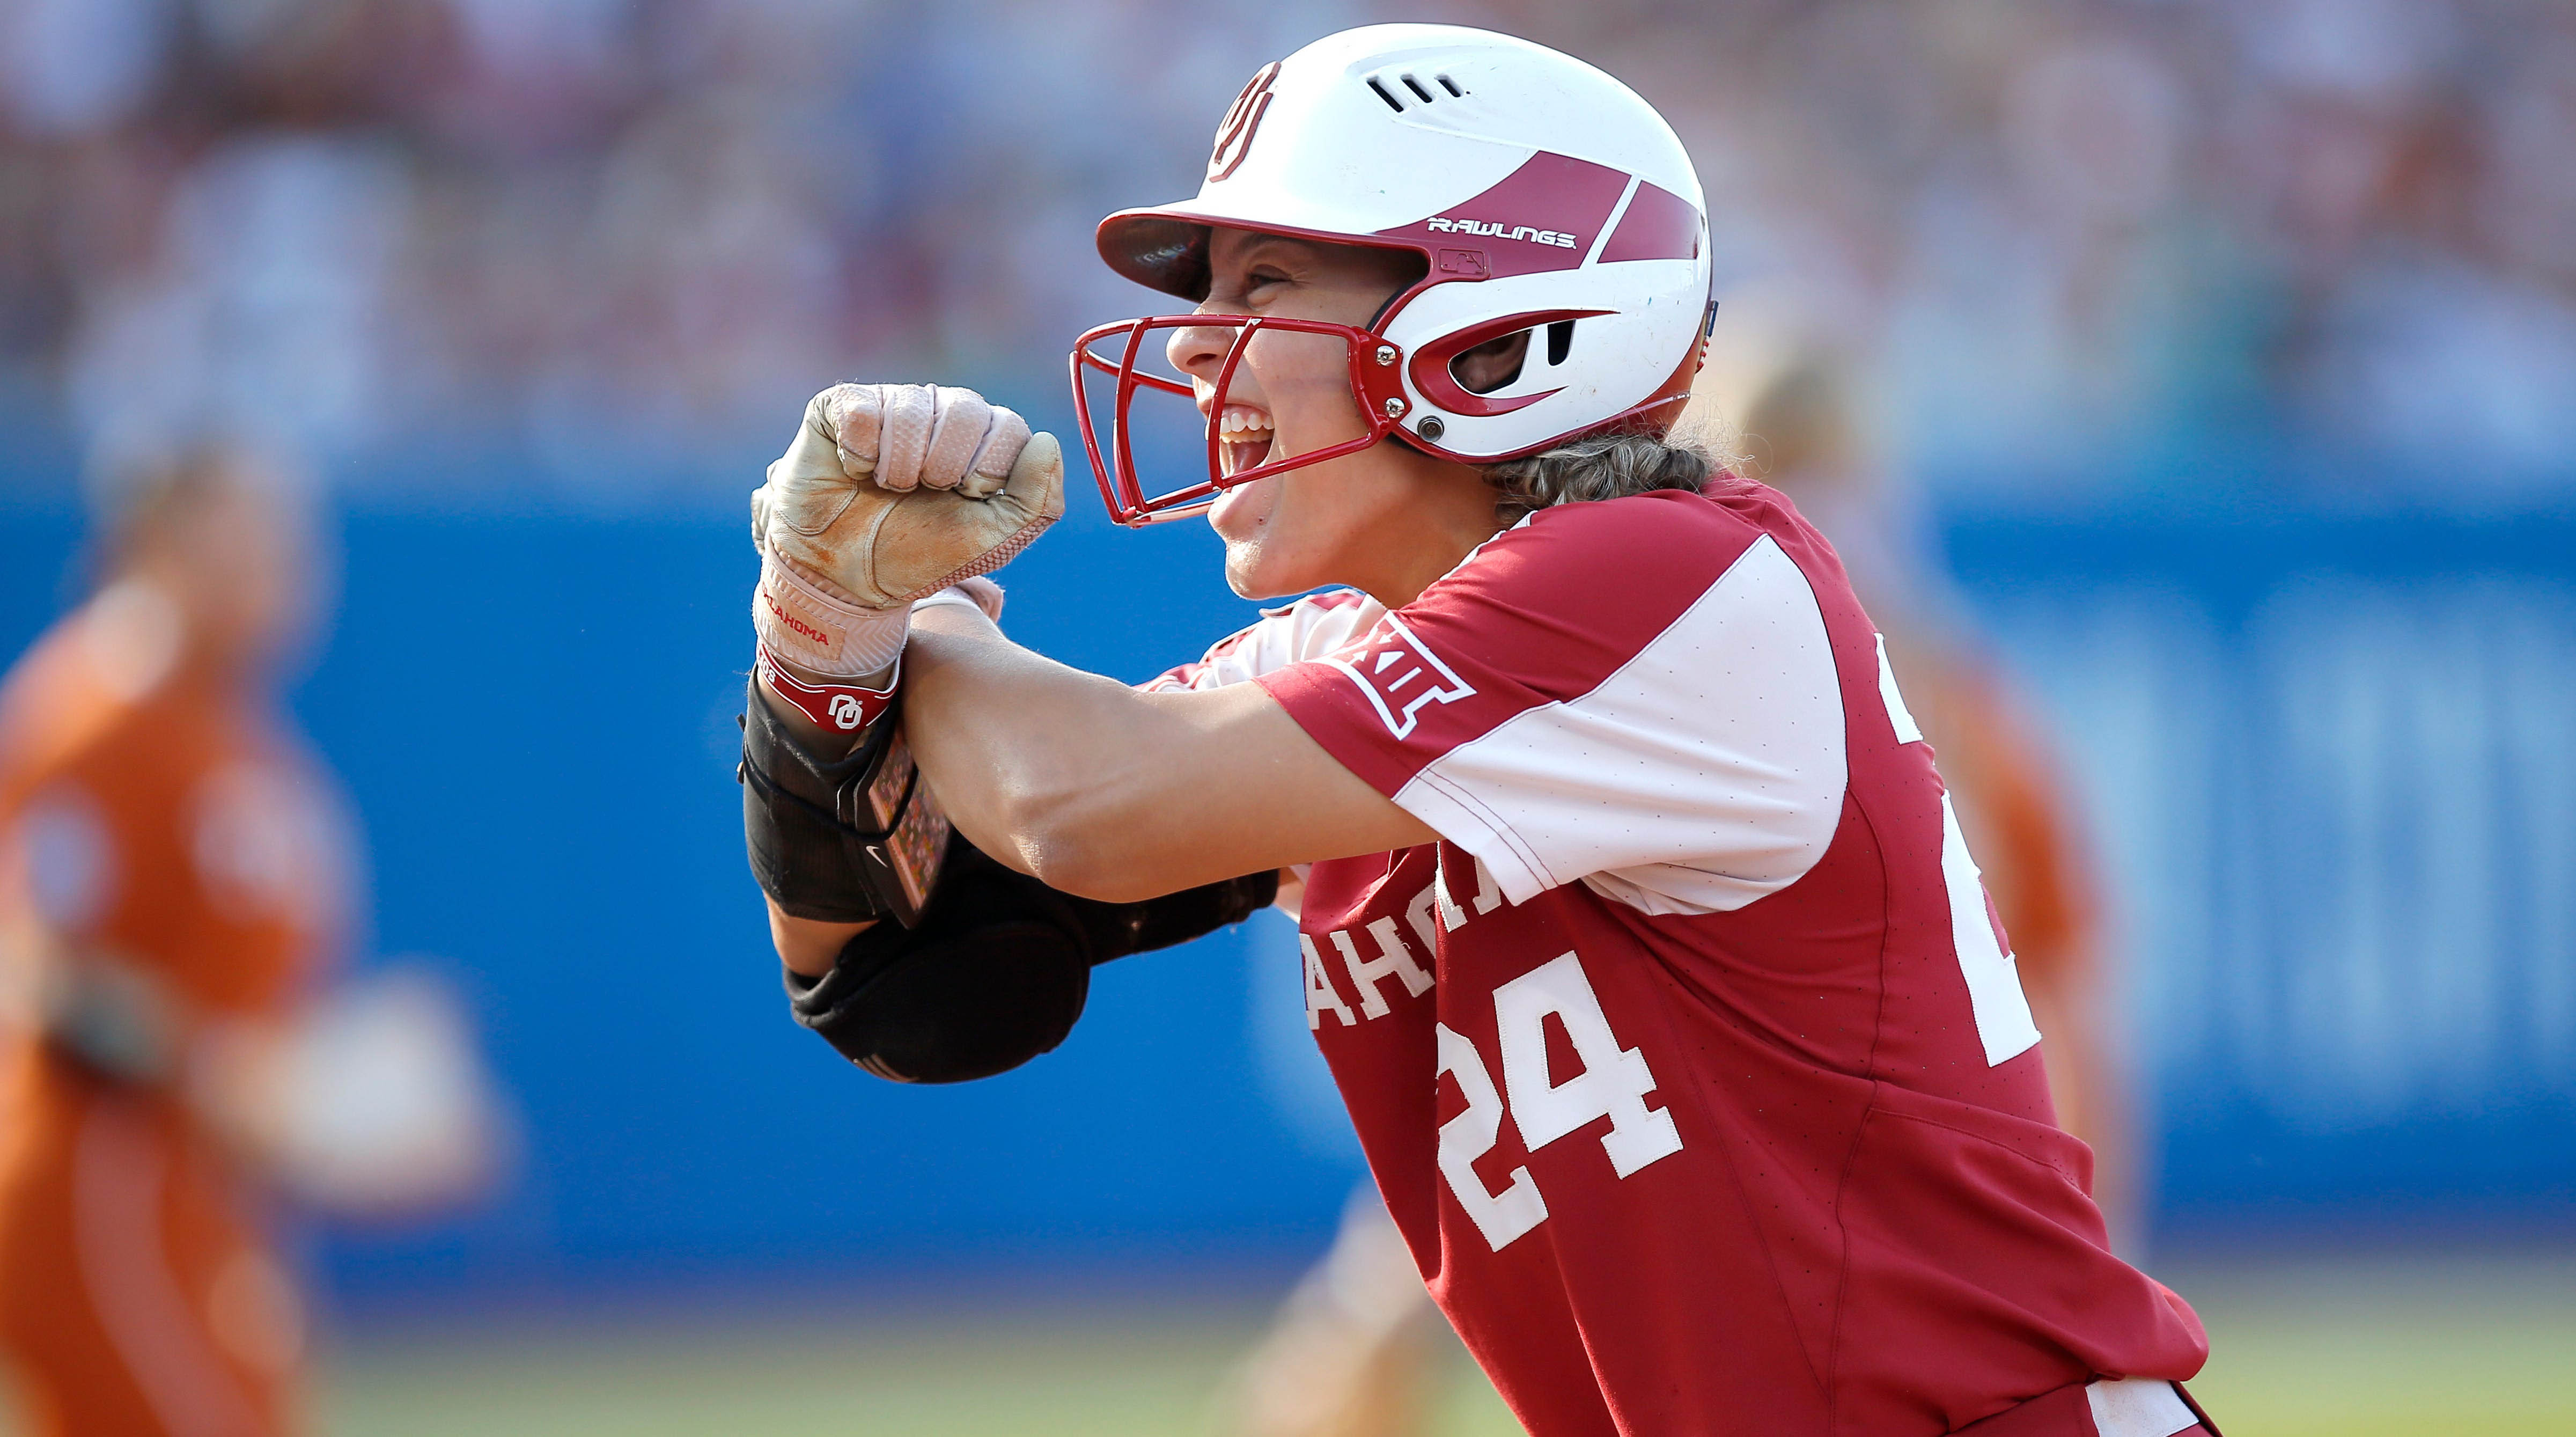 Oklahoma Blows Out Texas to Win Second Straight WCWS Title